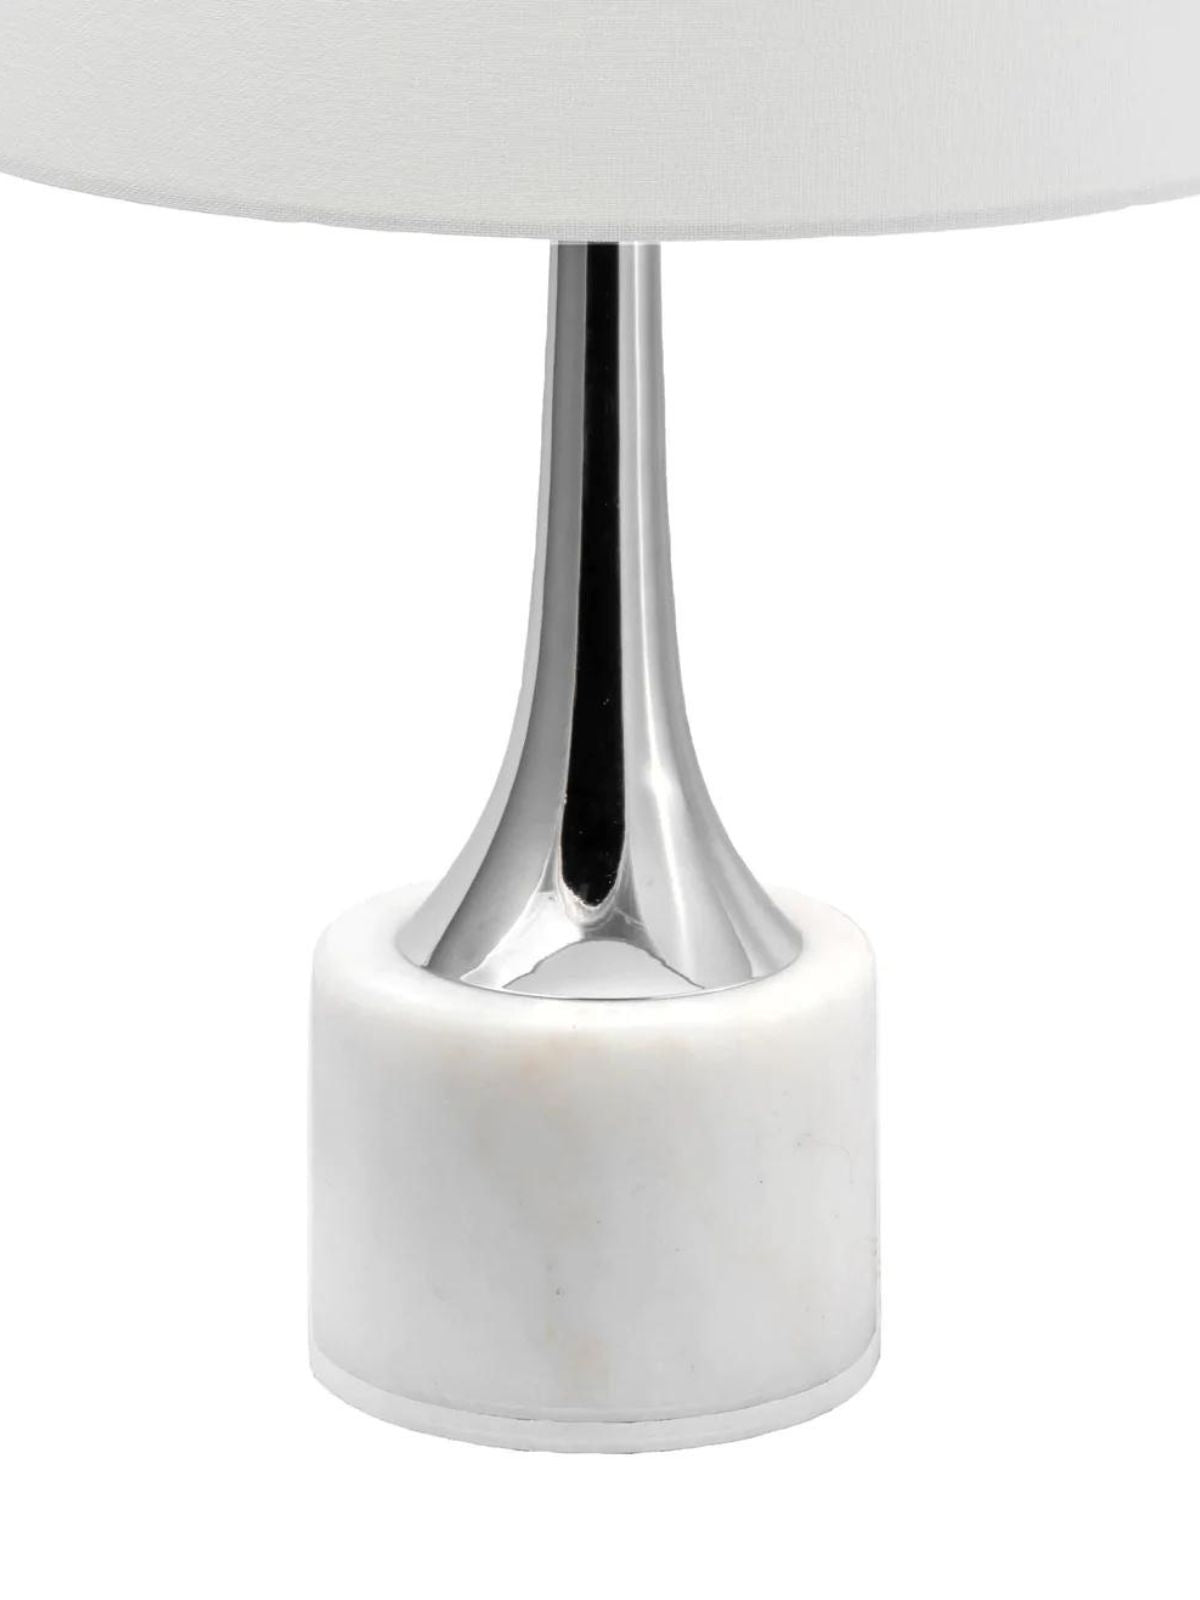 White and Silver Table Lamp on Marble Base, sold by KYA Home Decor.